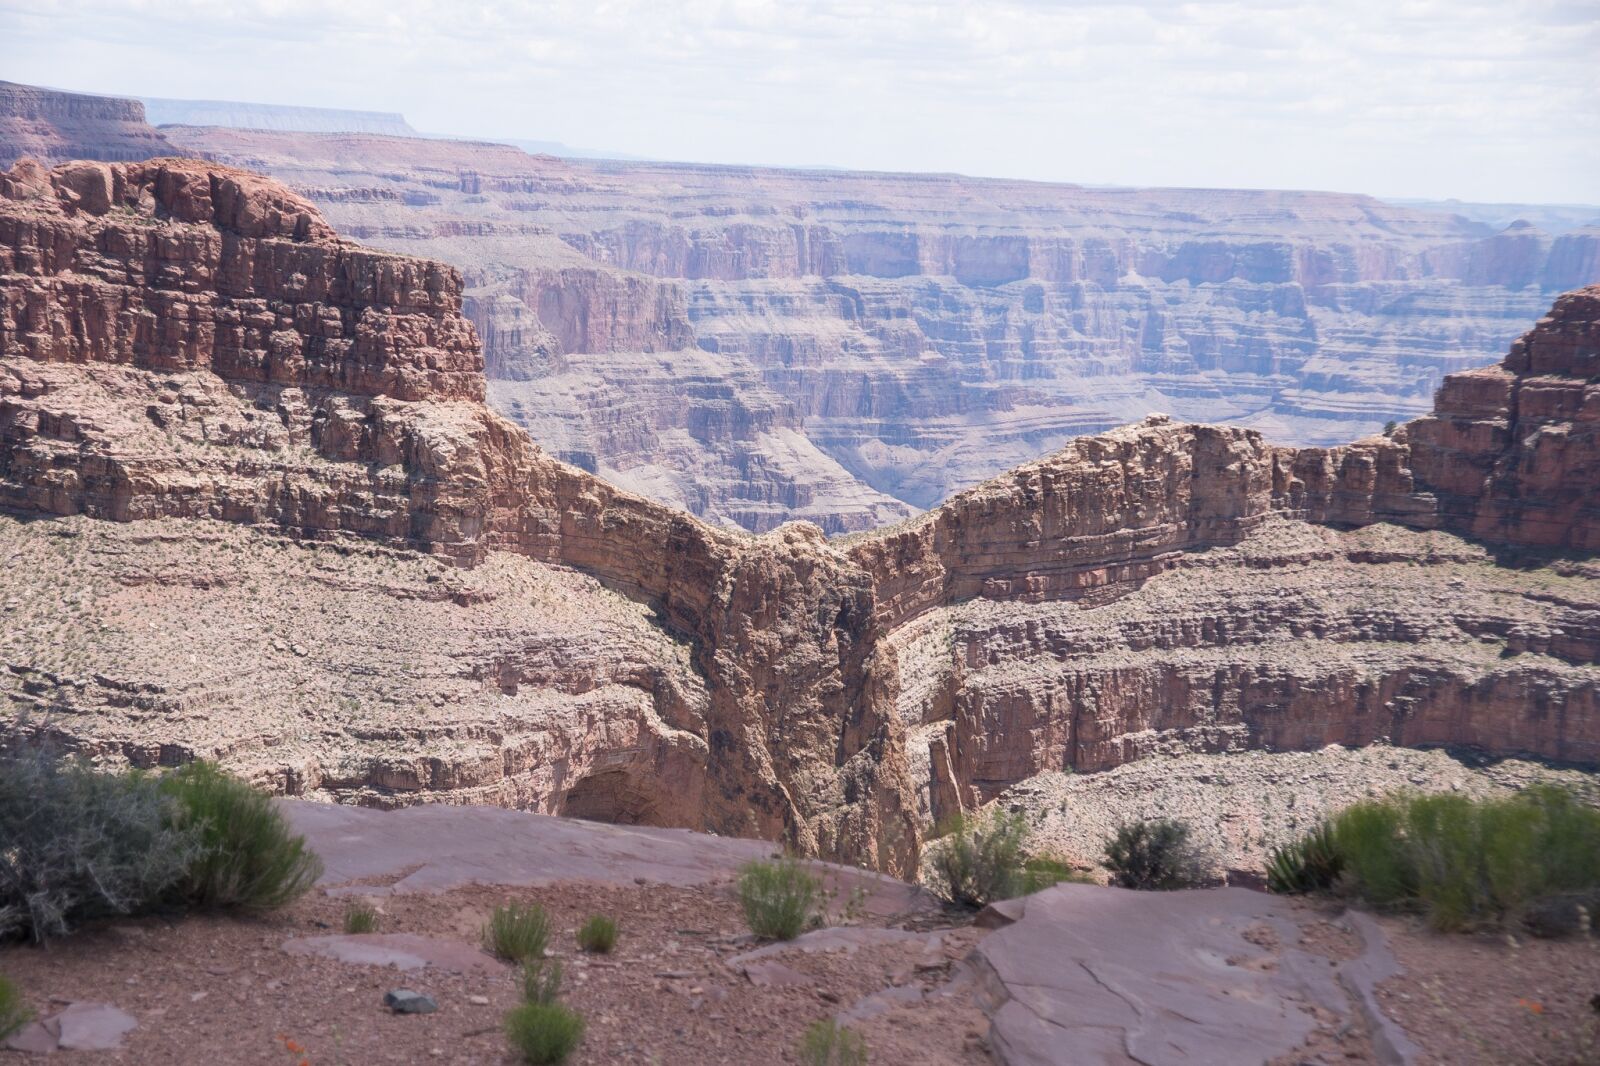 Sony DT 16-105mm F3.5-5.6 sample photo. Eagle point, west rim photography